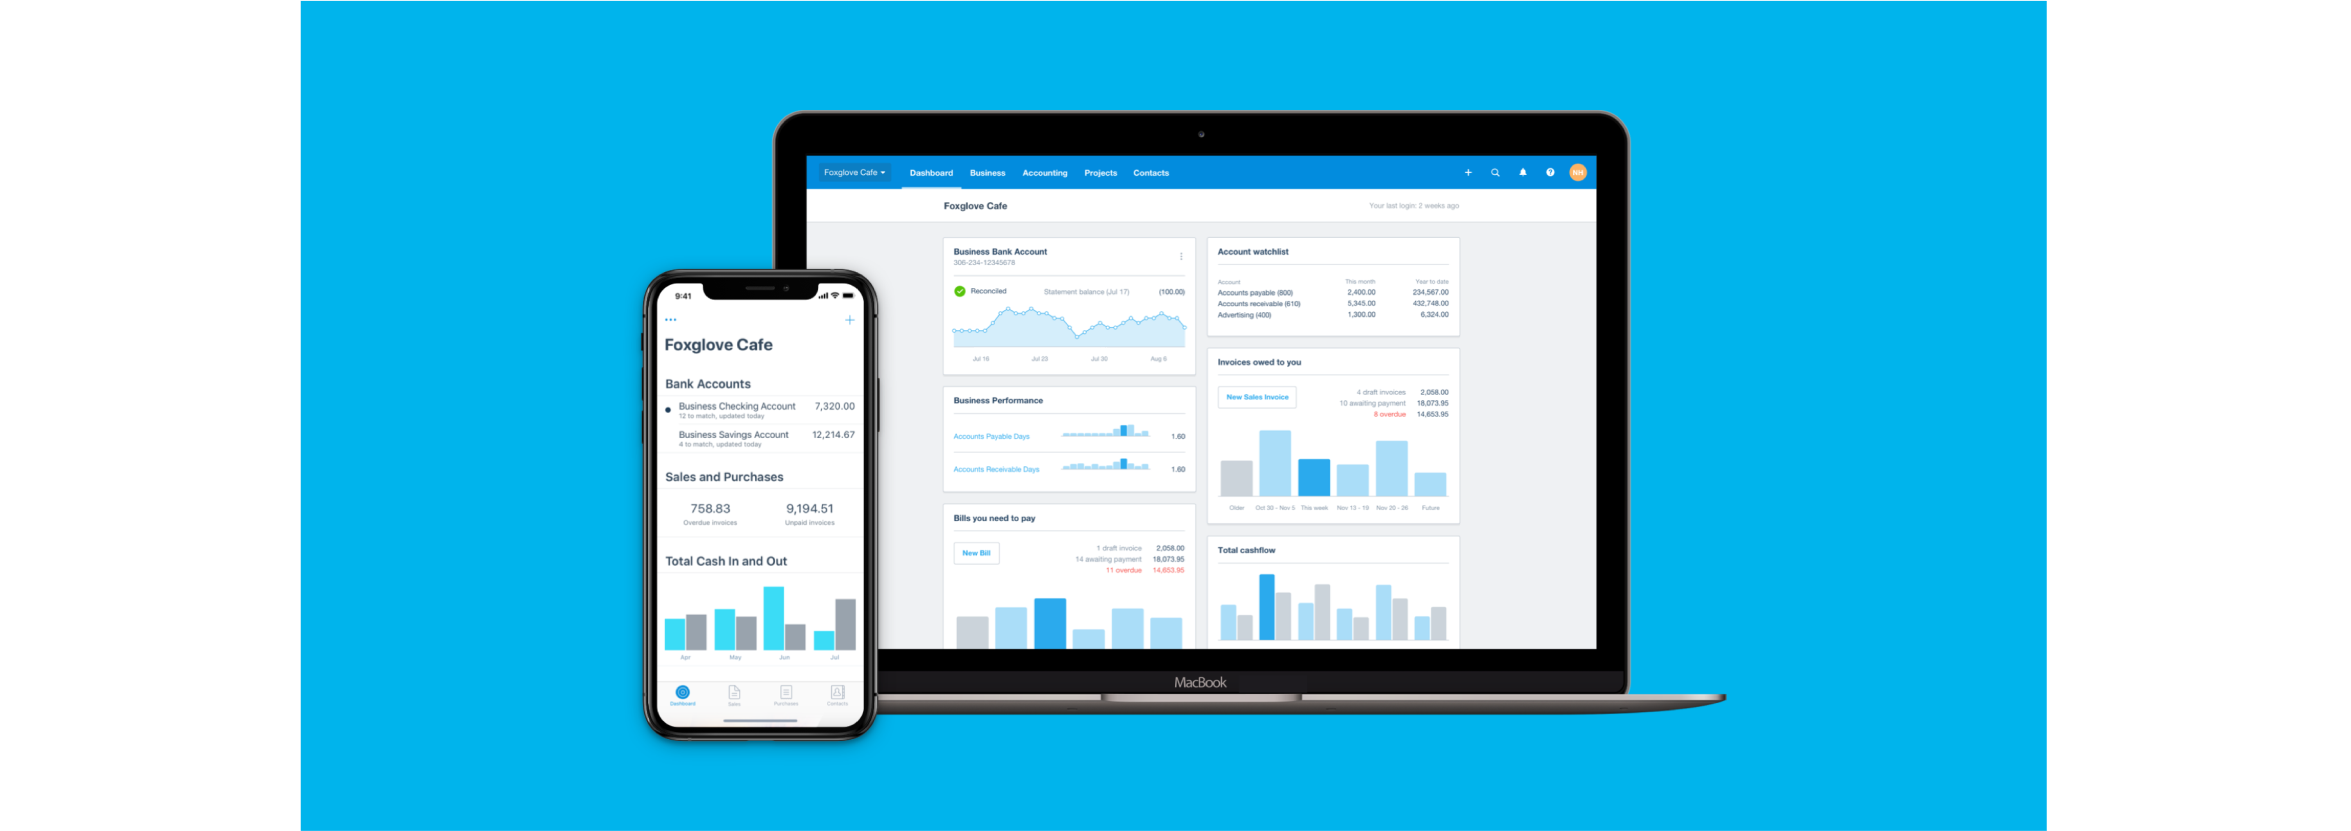 The Xero dashboard shows bank balances, invoices owed, and an accounts watchlist on mobile phone and a laptop. 